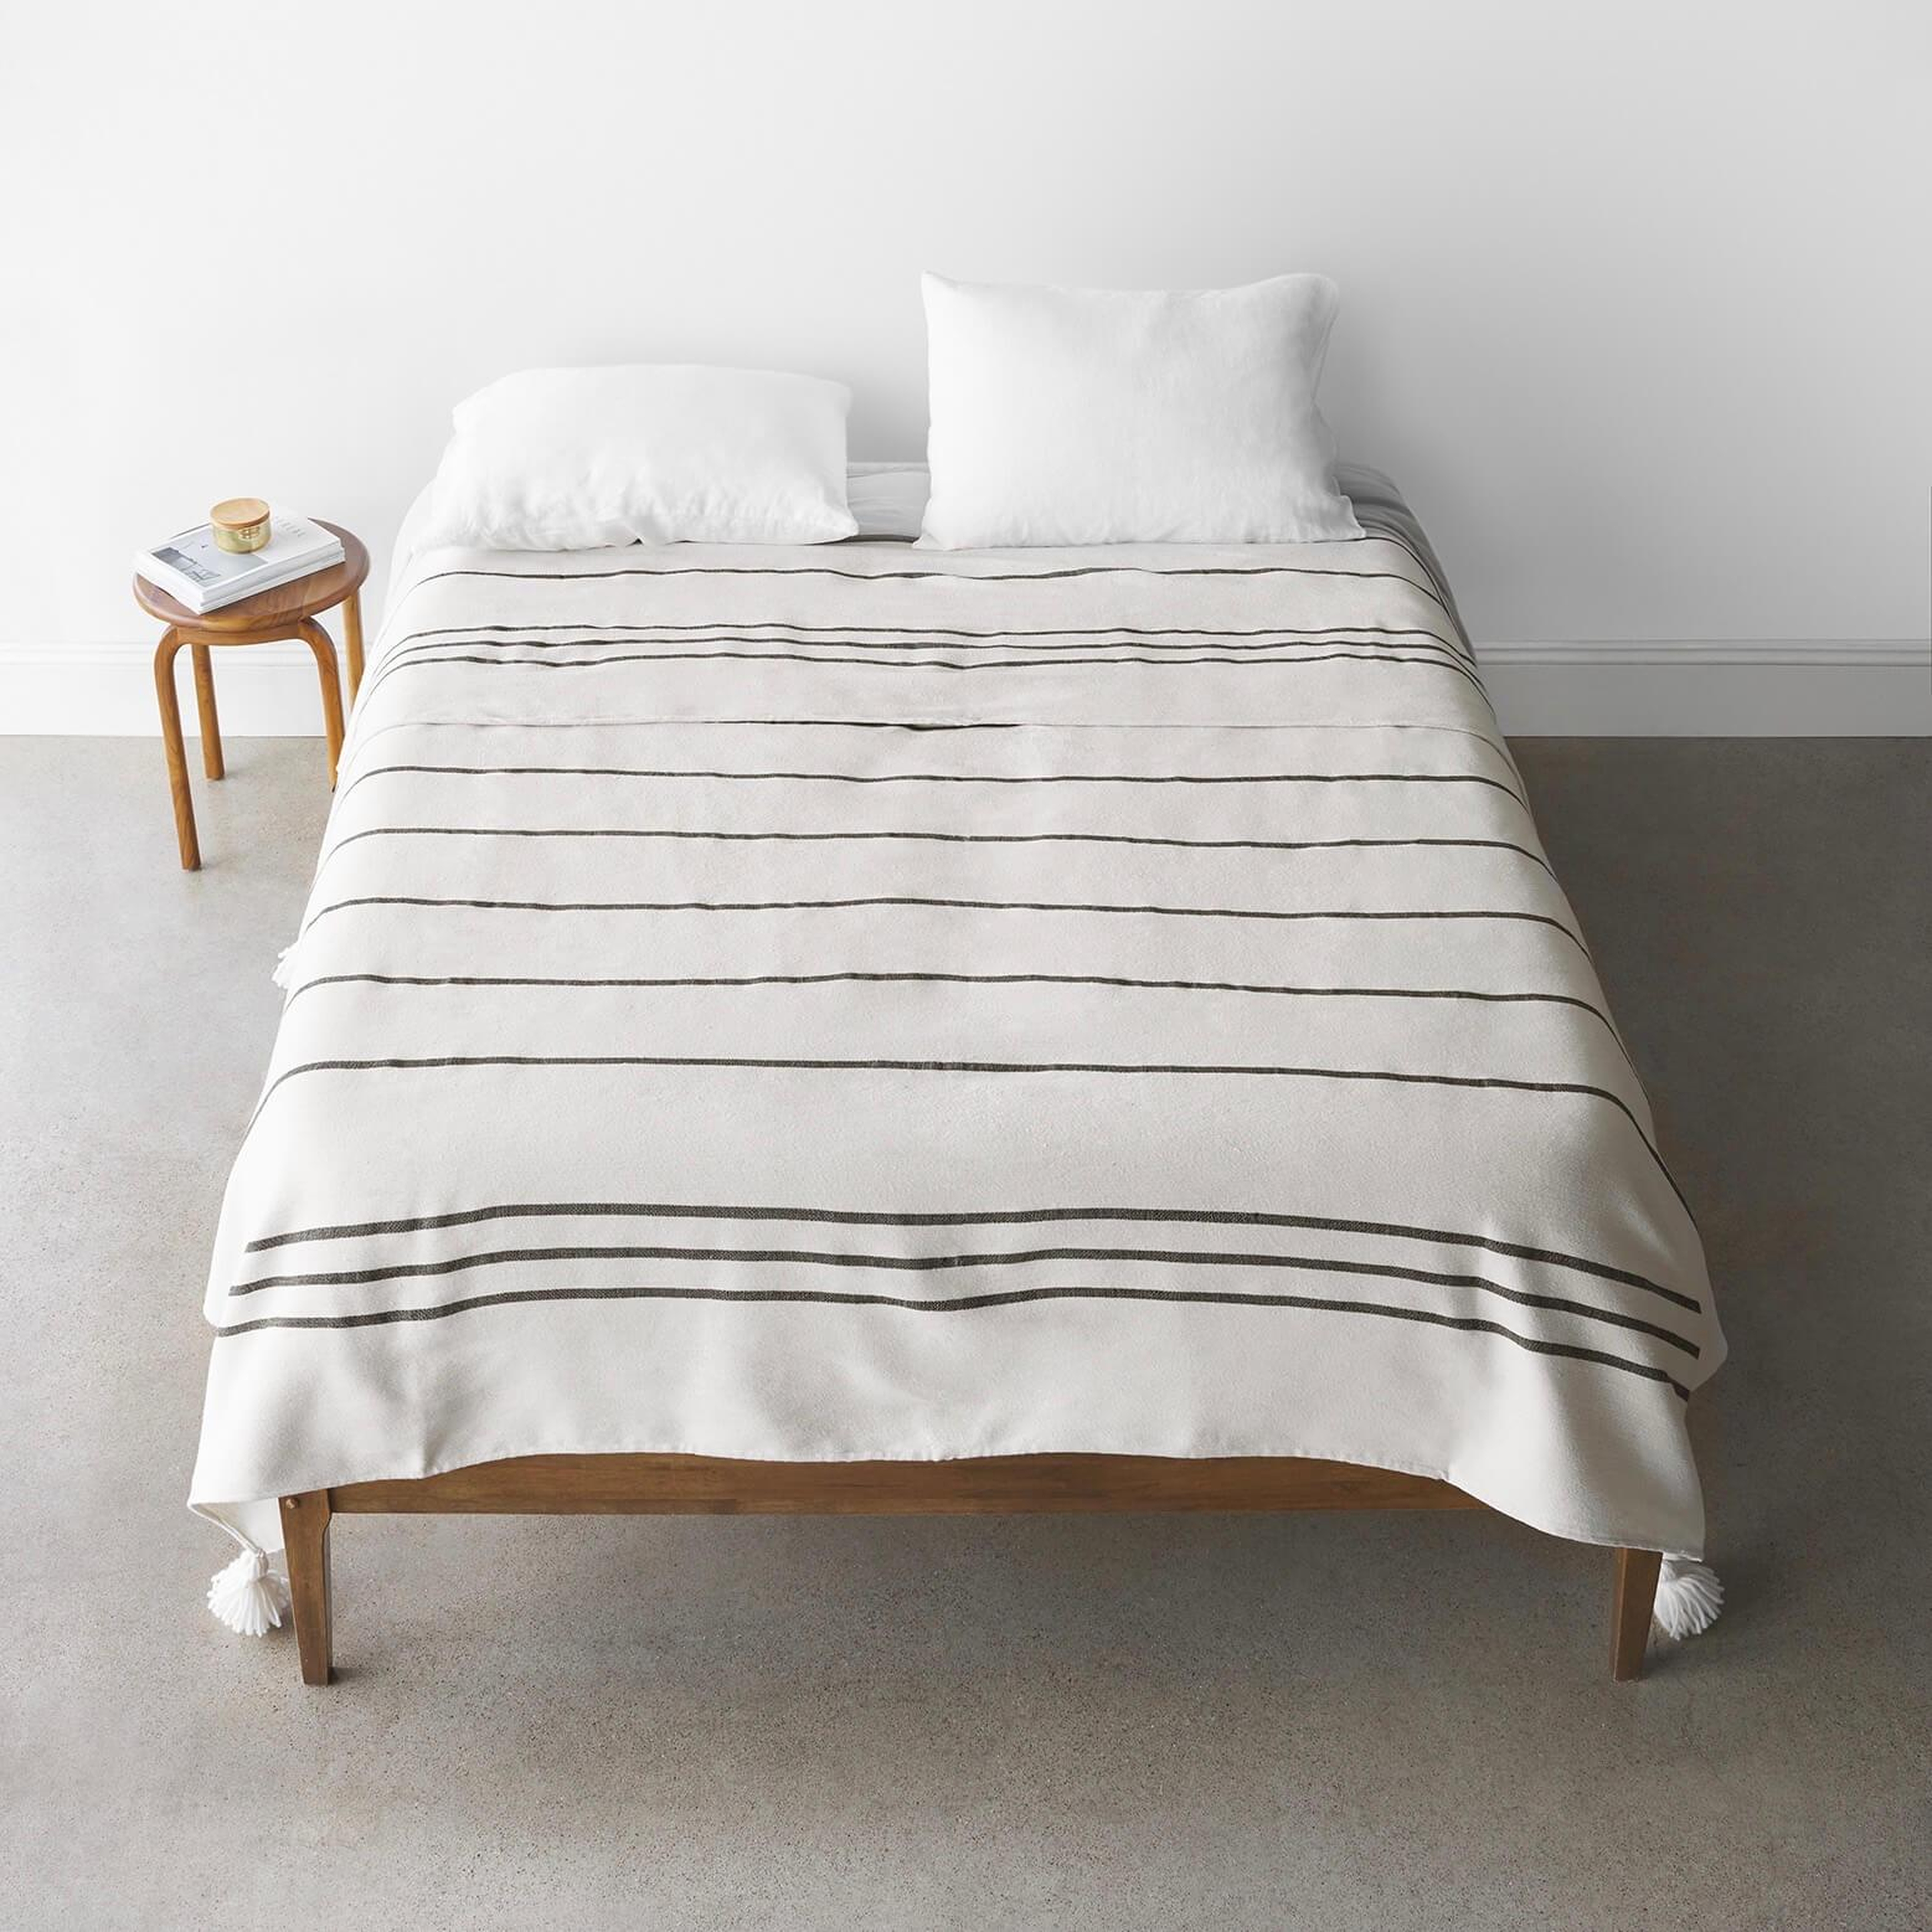 Safiyya Bed Blanket - Full/Queen By The Citizenry - The Citizenry